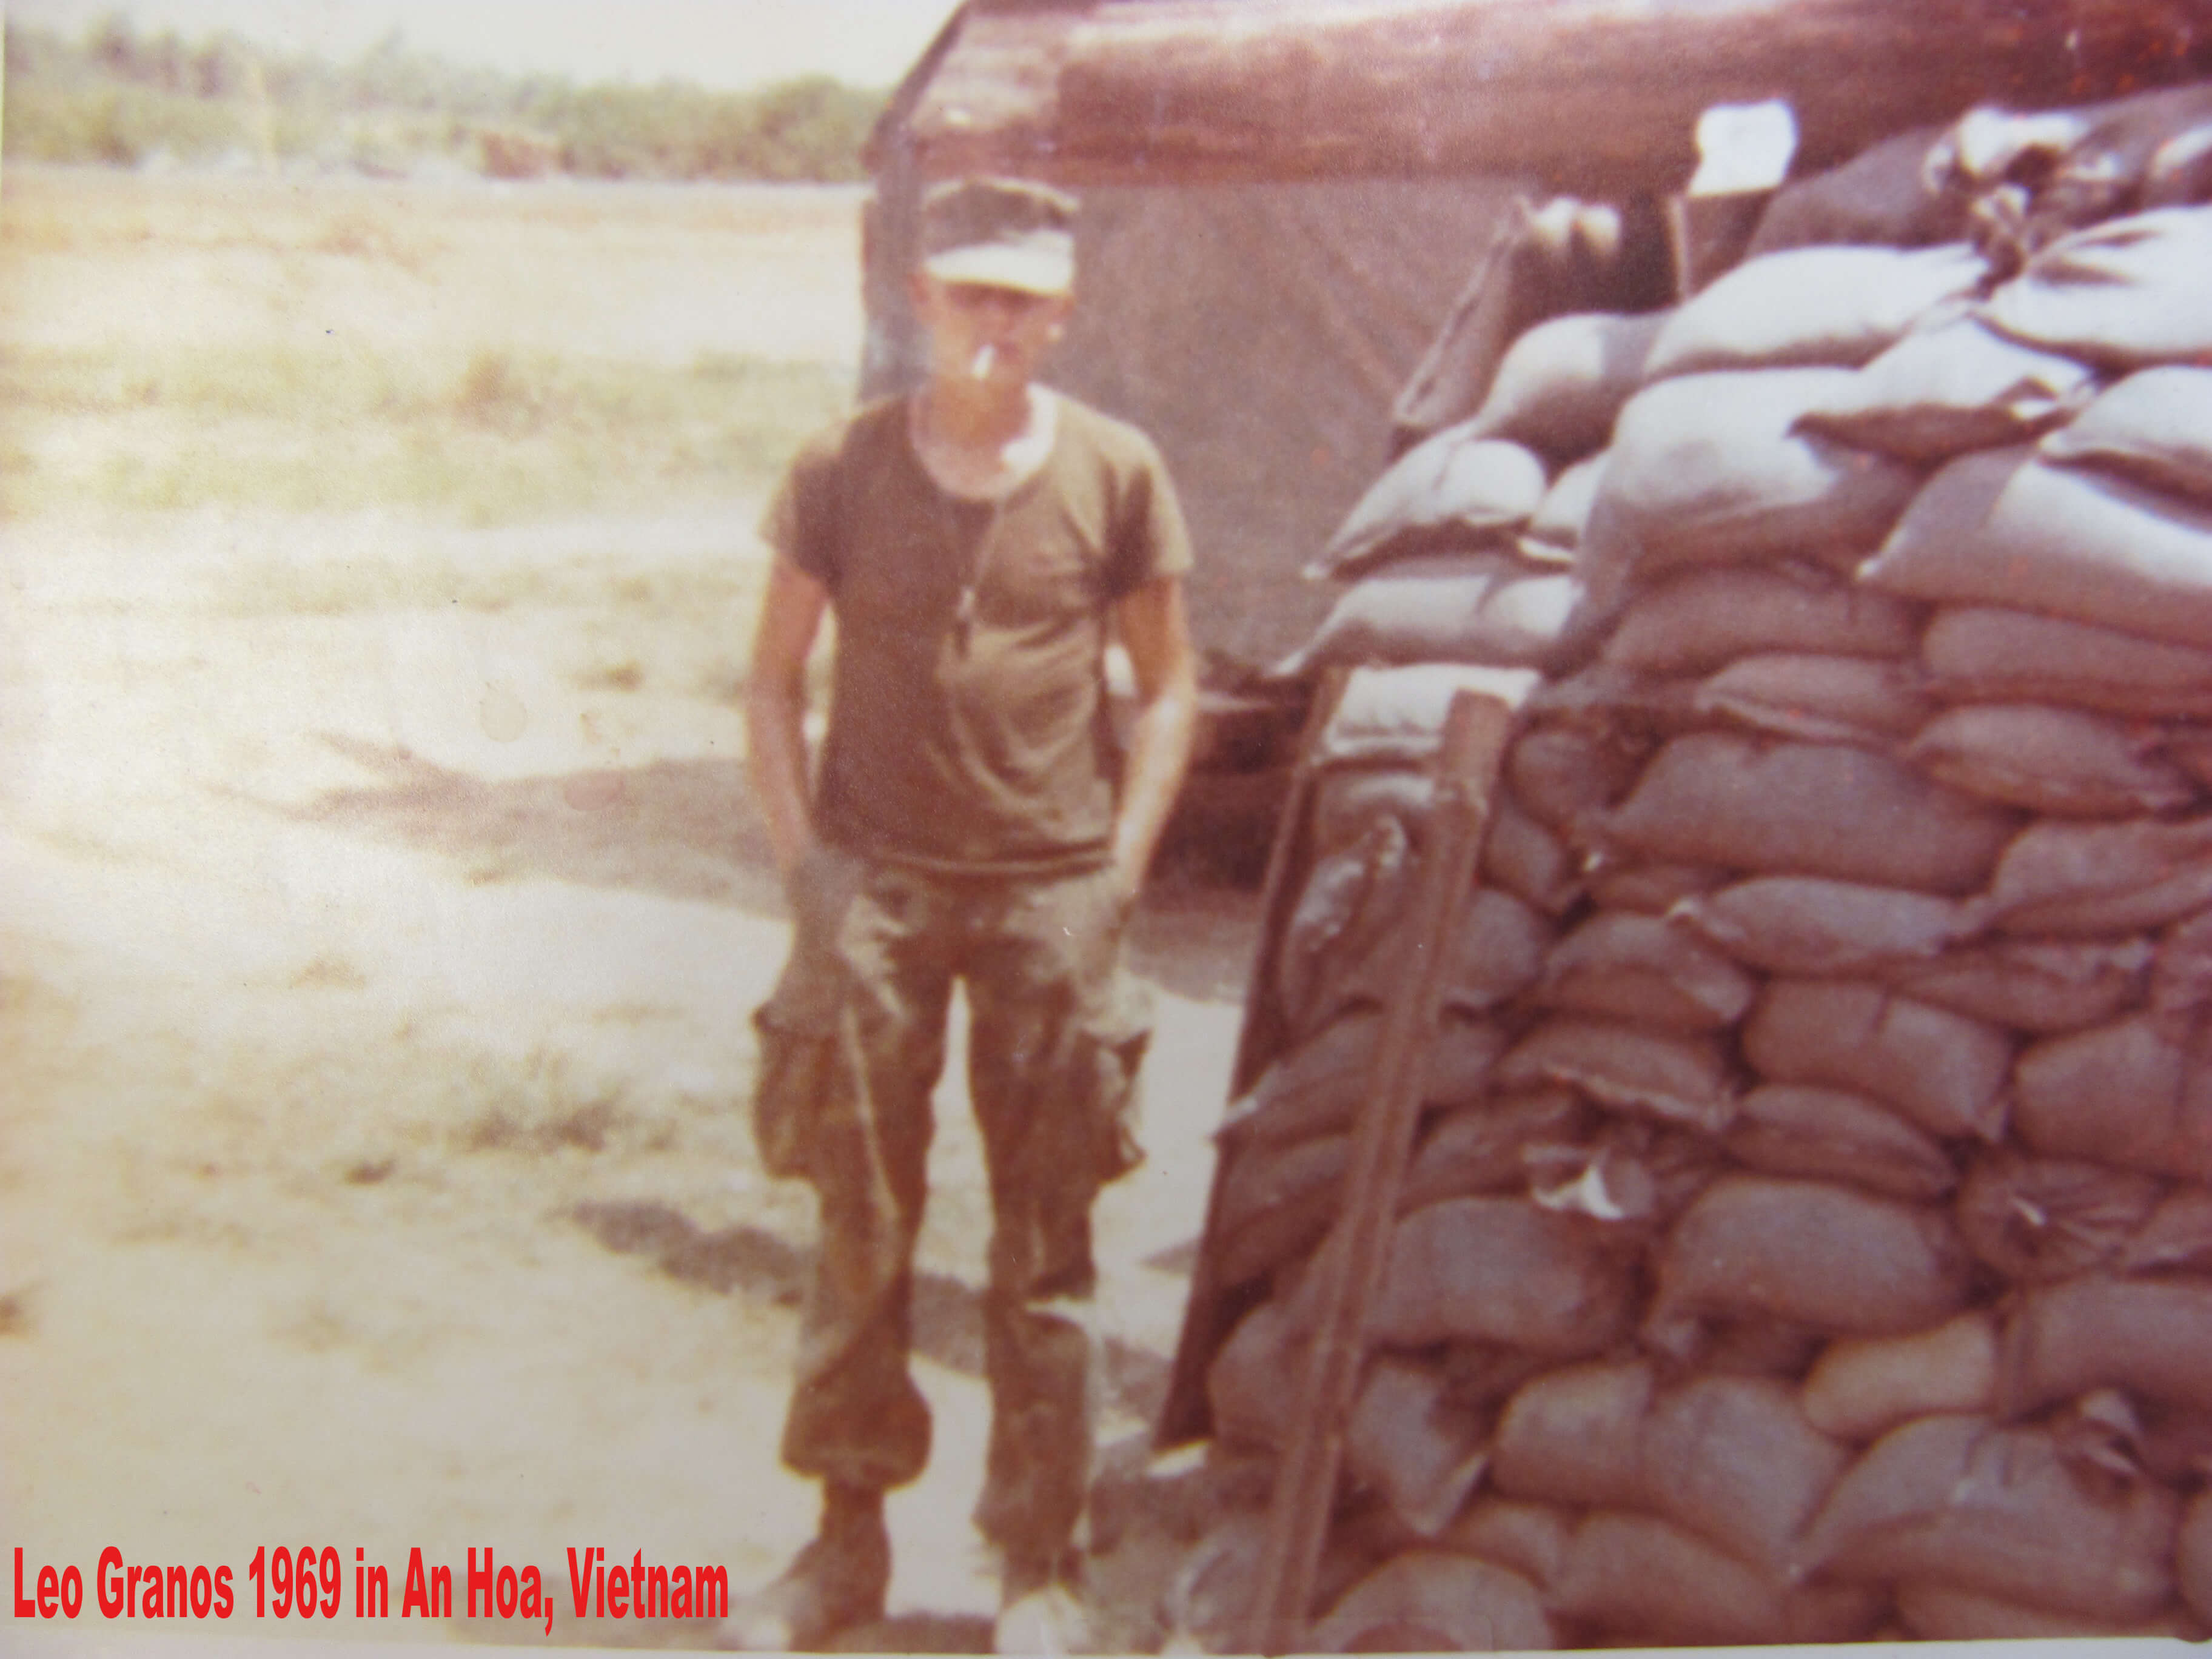 A young soldier standing near a mound of sandbags with a cigarette in his mouth and his hands in his pockets. Text on photo reads "Leo Granos 1969 in An Hoa, Vietnam."